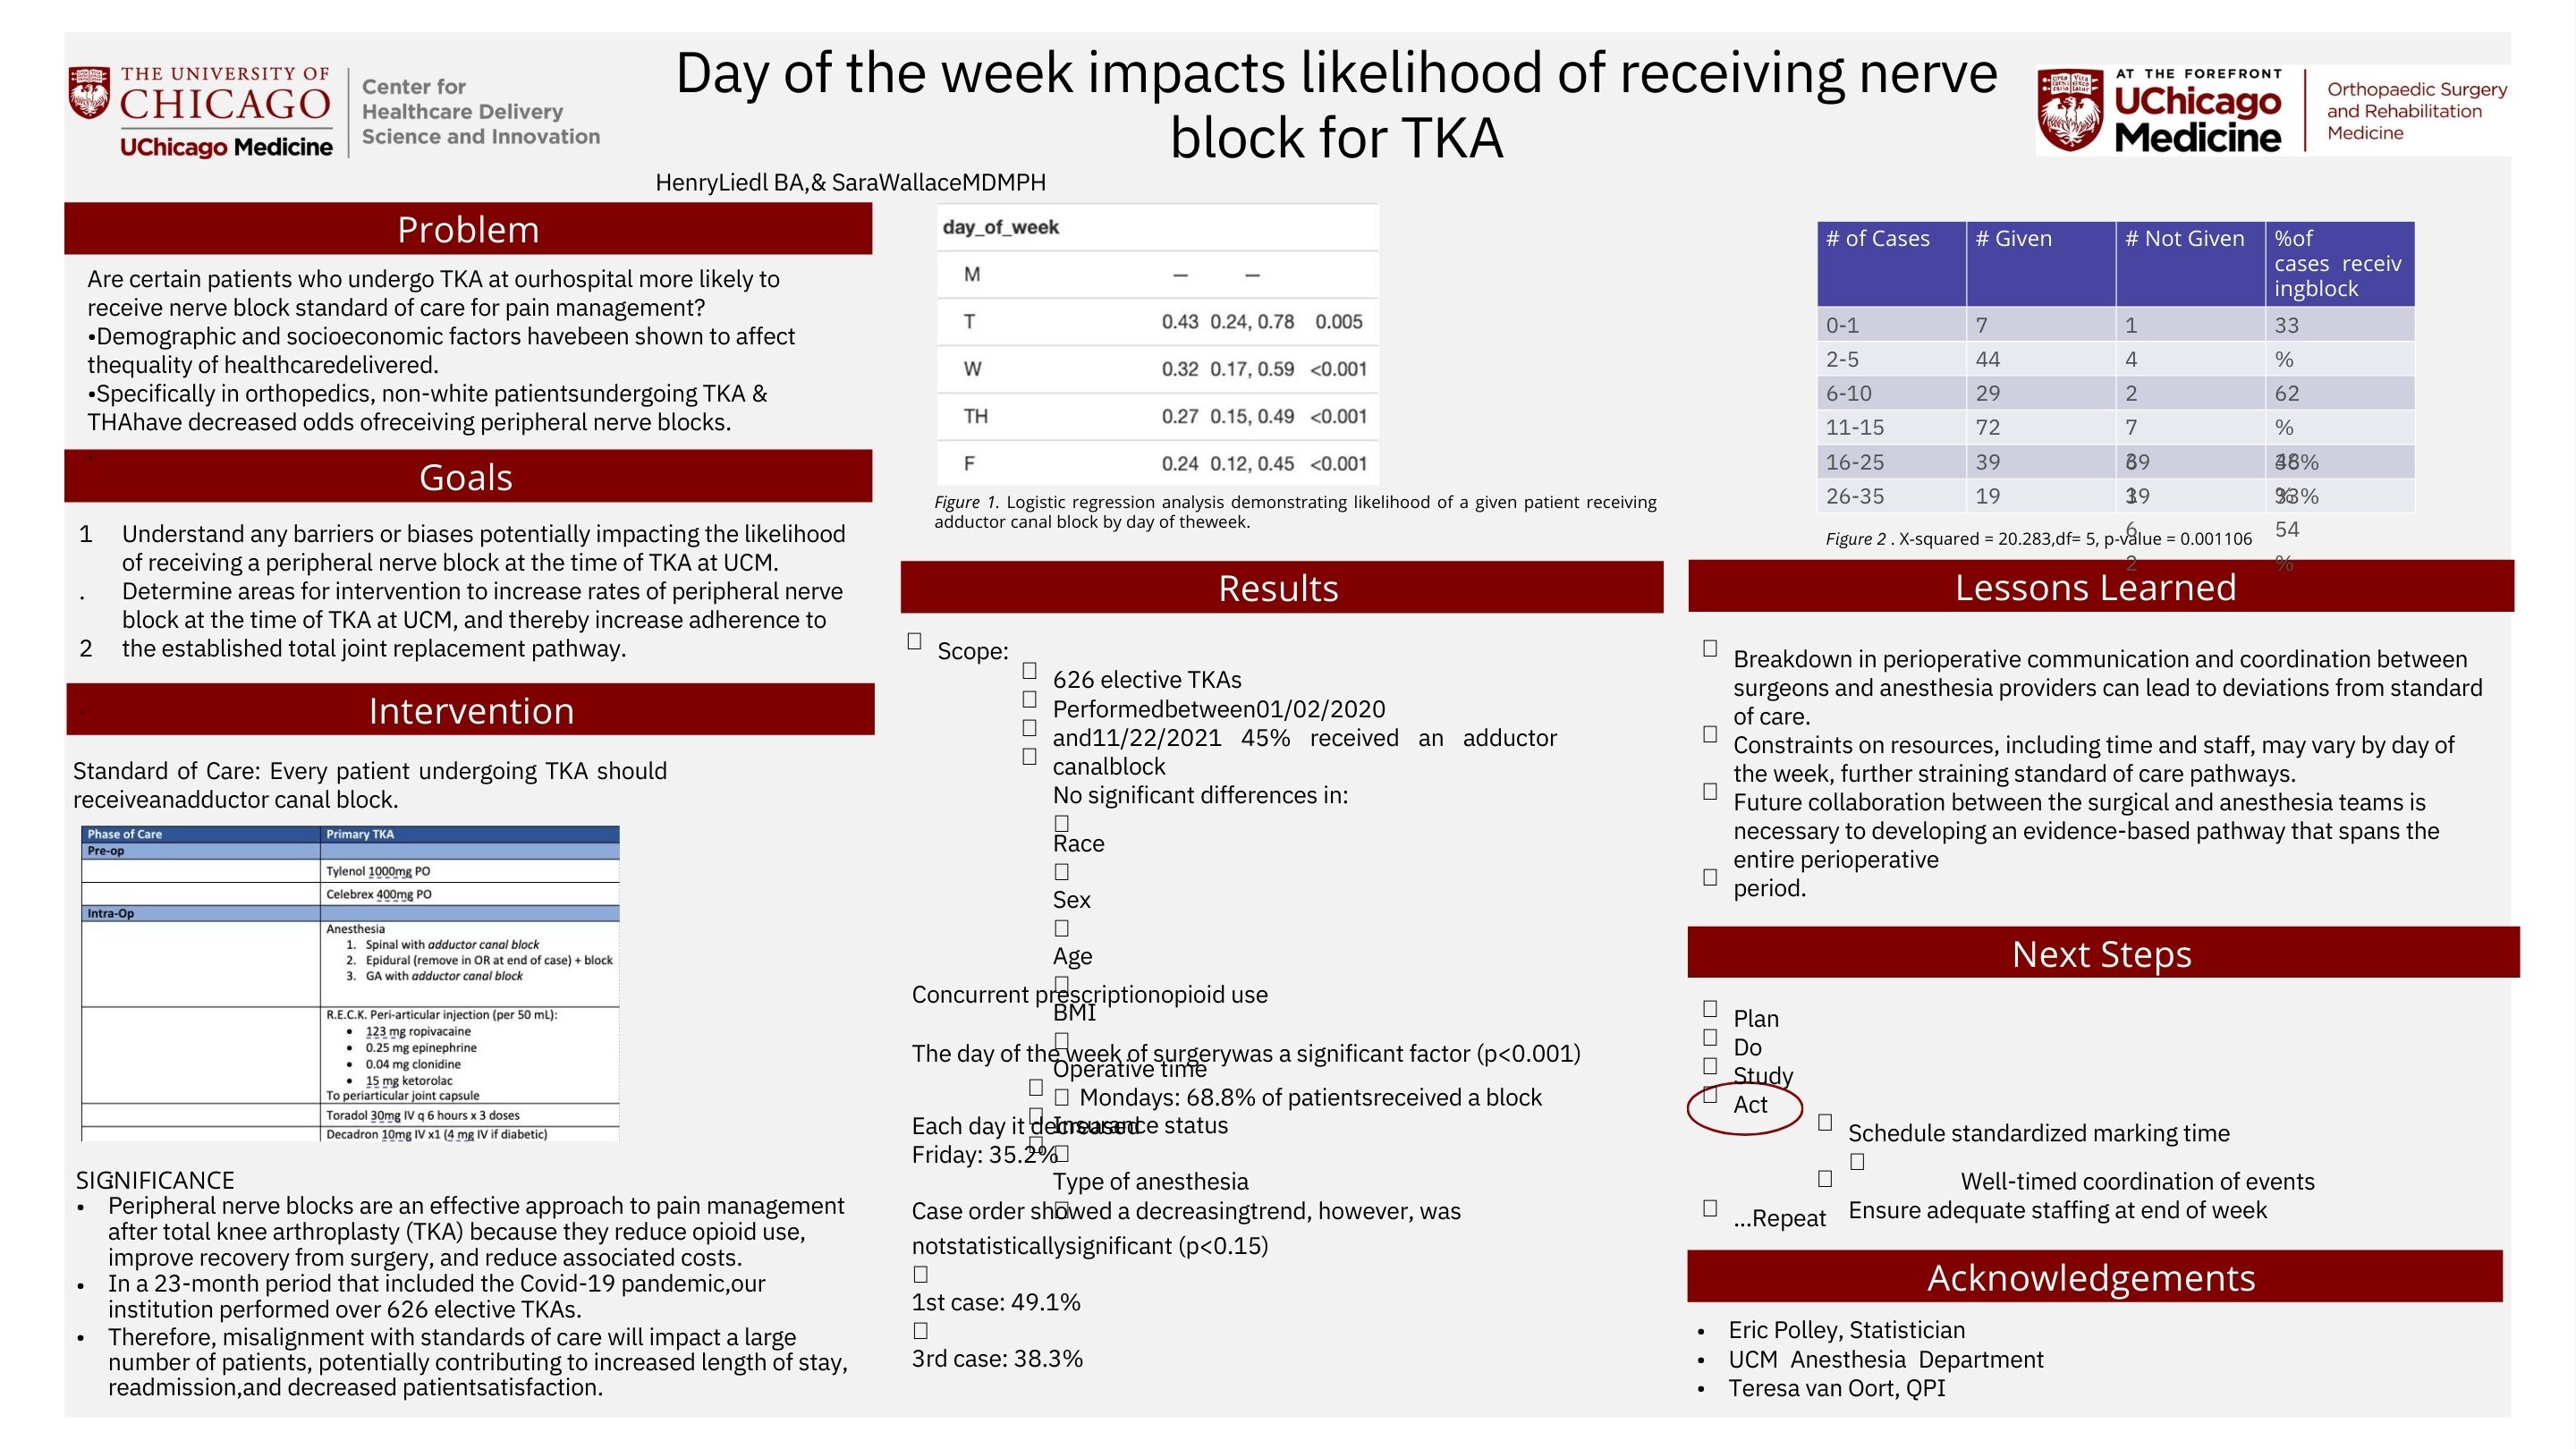 LIEDL_Day of the week impacts likelihood of receiving nerve block for TKA